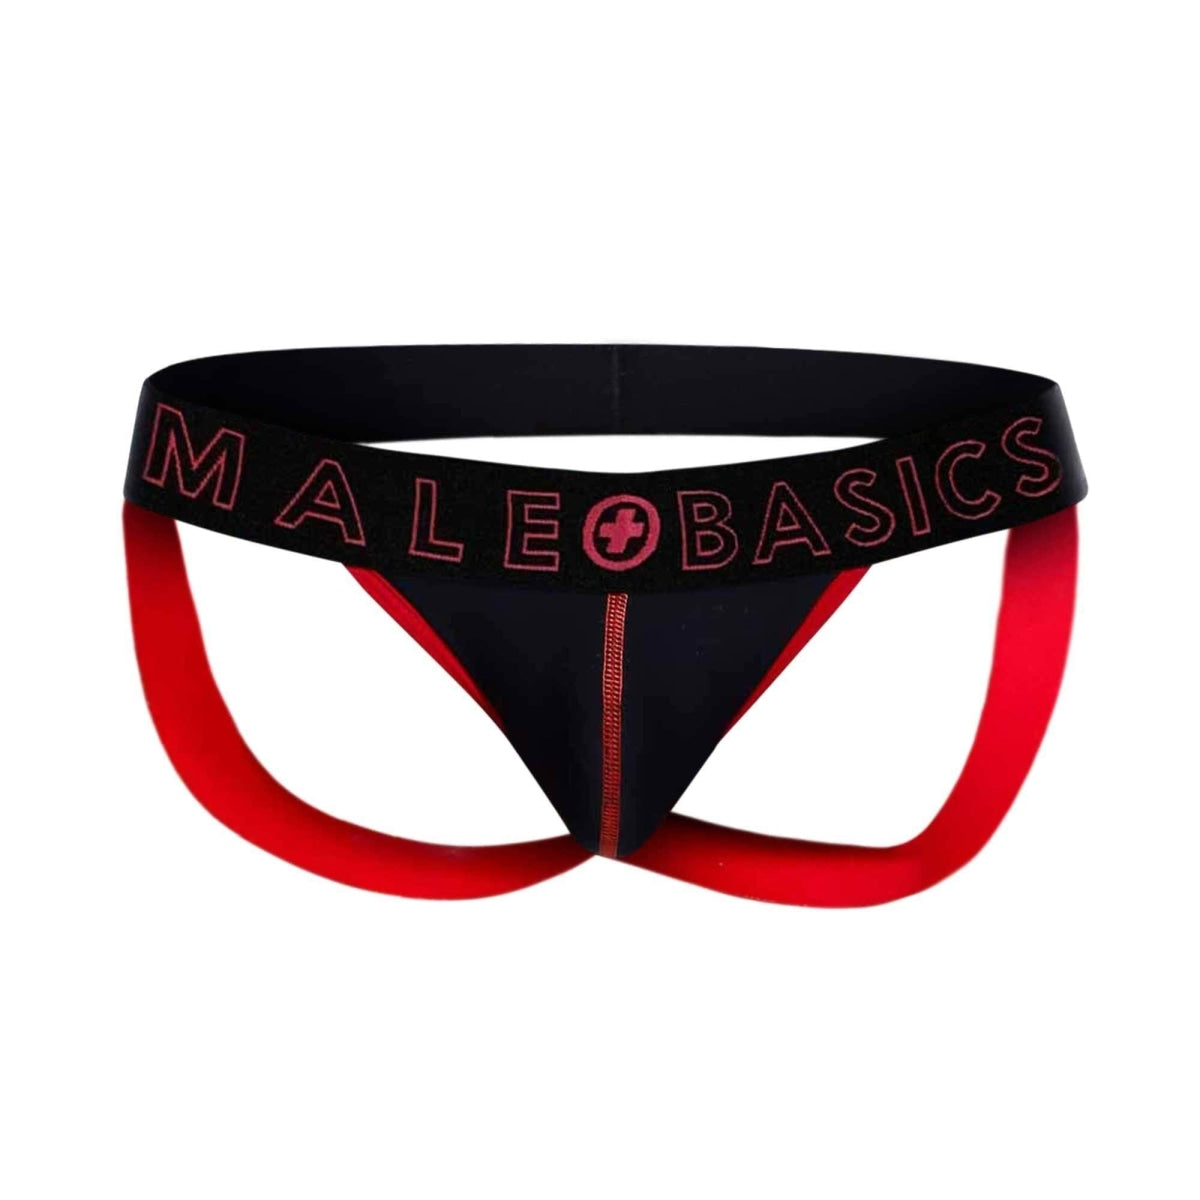 Mb Neon Jock Red Small Intimates Adult Boutique